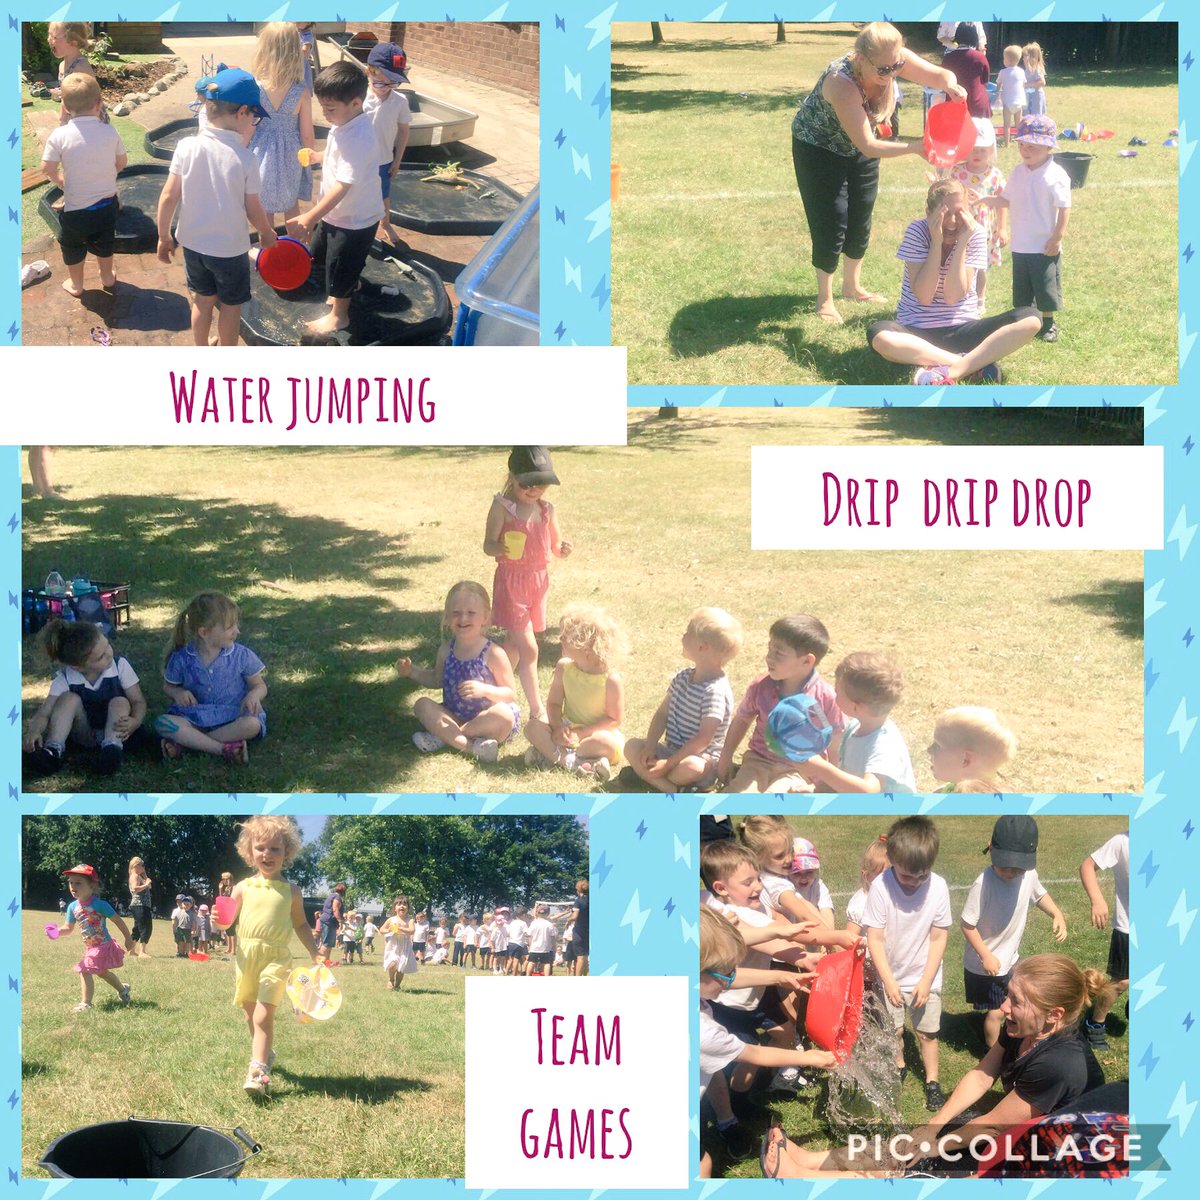 We loved 'Wet Wednesday' in Nursery today and a big thank you to Reception for a brilliant afternoon of water games. #NationalSchoolSportsWeek @barntonminis @BarntonMrsWills @Barntonhead @BarntonMrsL